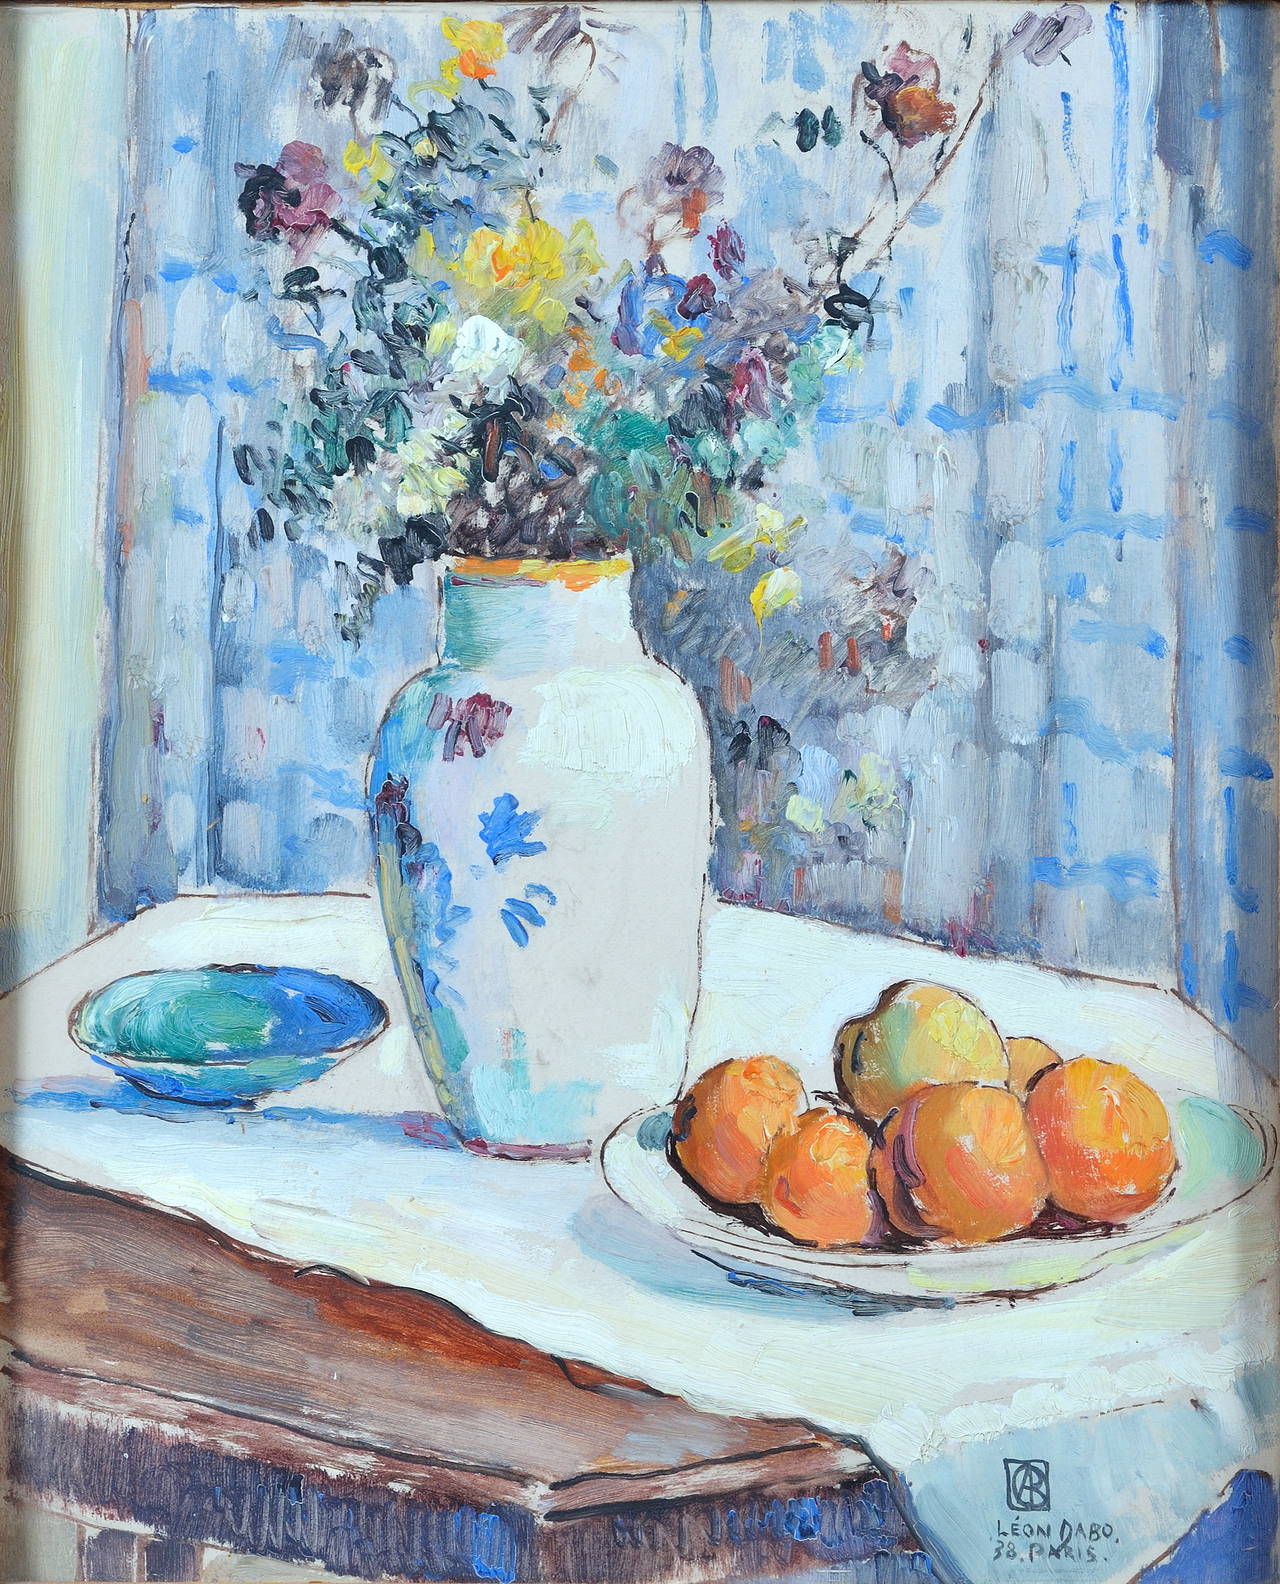 Leon Dabo (American, 1865-1960).
Lovely and fresh painting with wildflowers in a vase, peaches and a blue faience bowl on a table covered with a fine white linen against a curtain with blue patterns.
1938.
Oil on cardboard with protective